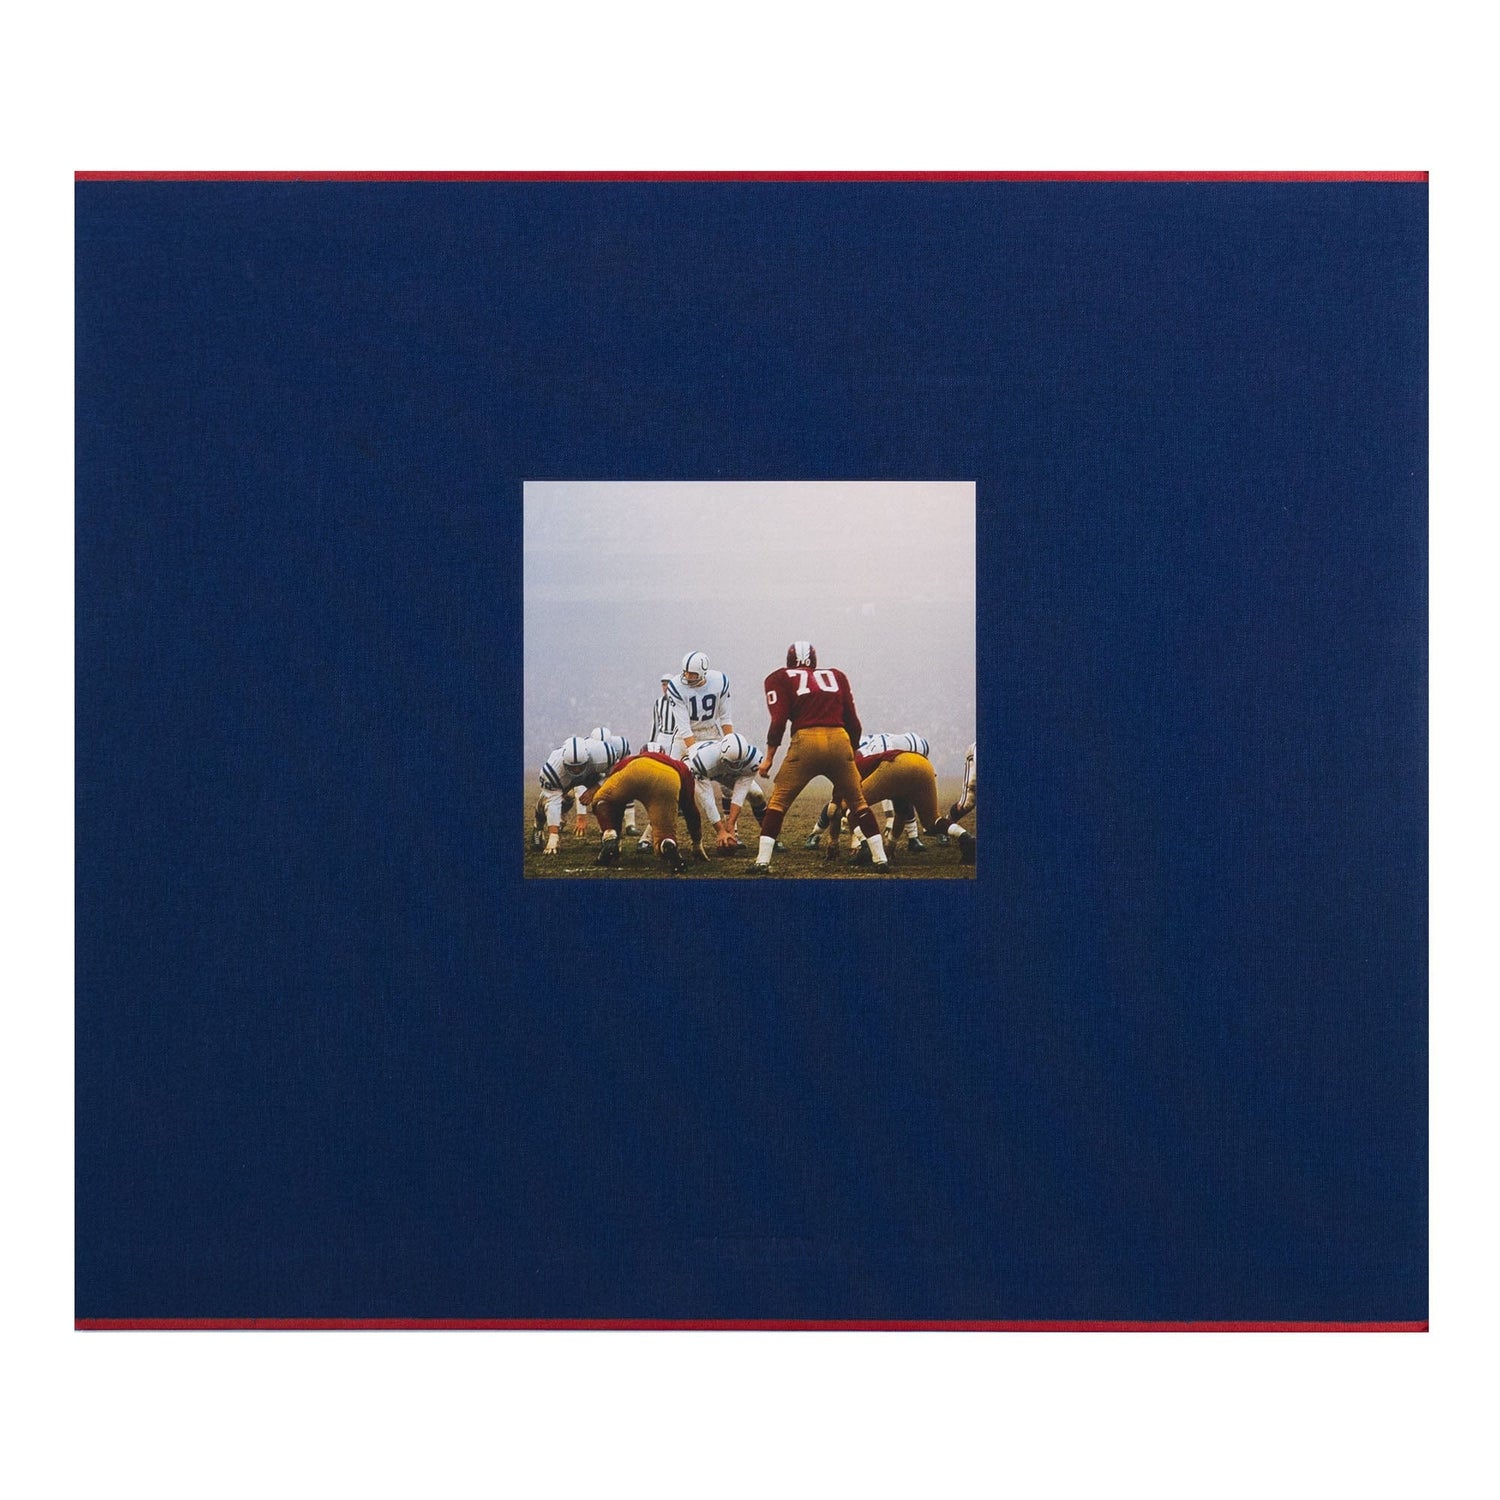 Neil Leifer: Guts & Glory “The Golden Age of American Football 1958-1978 Navy Background